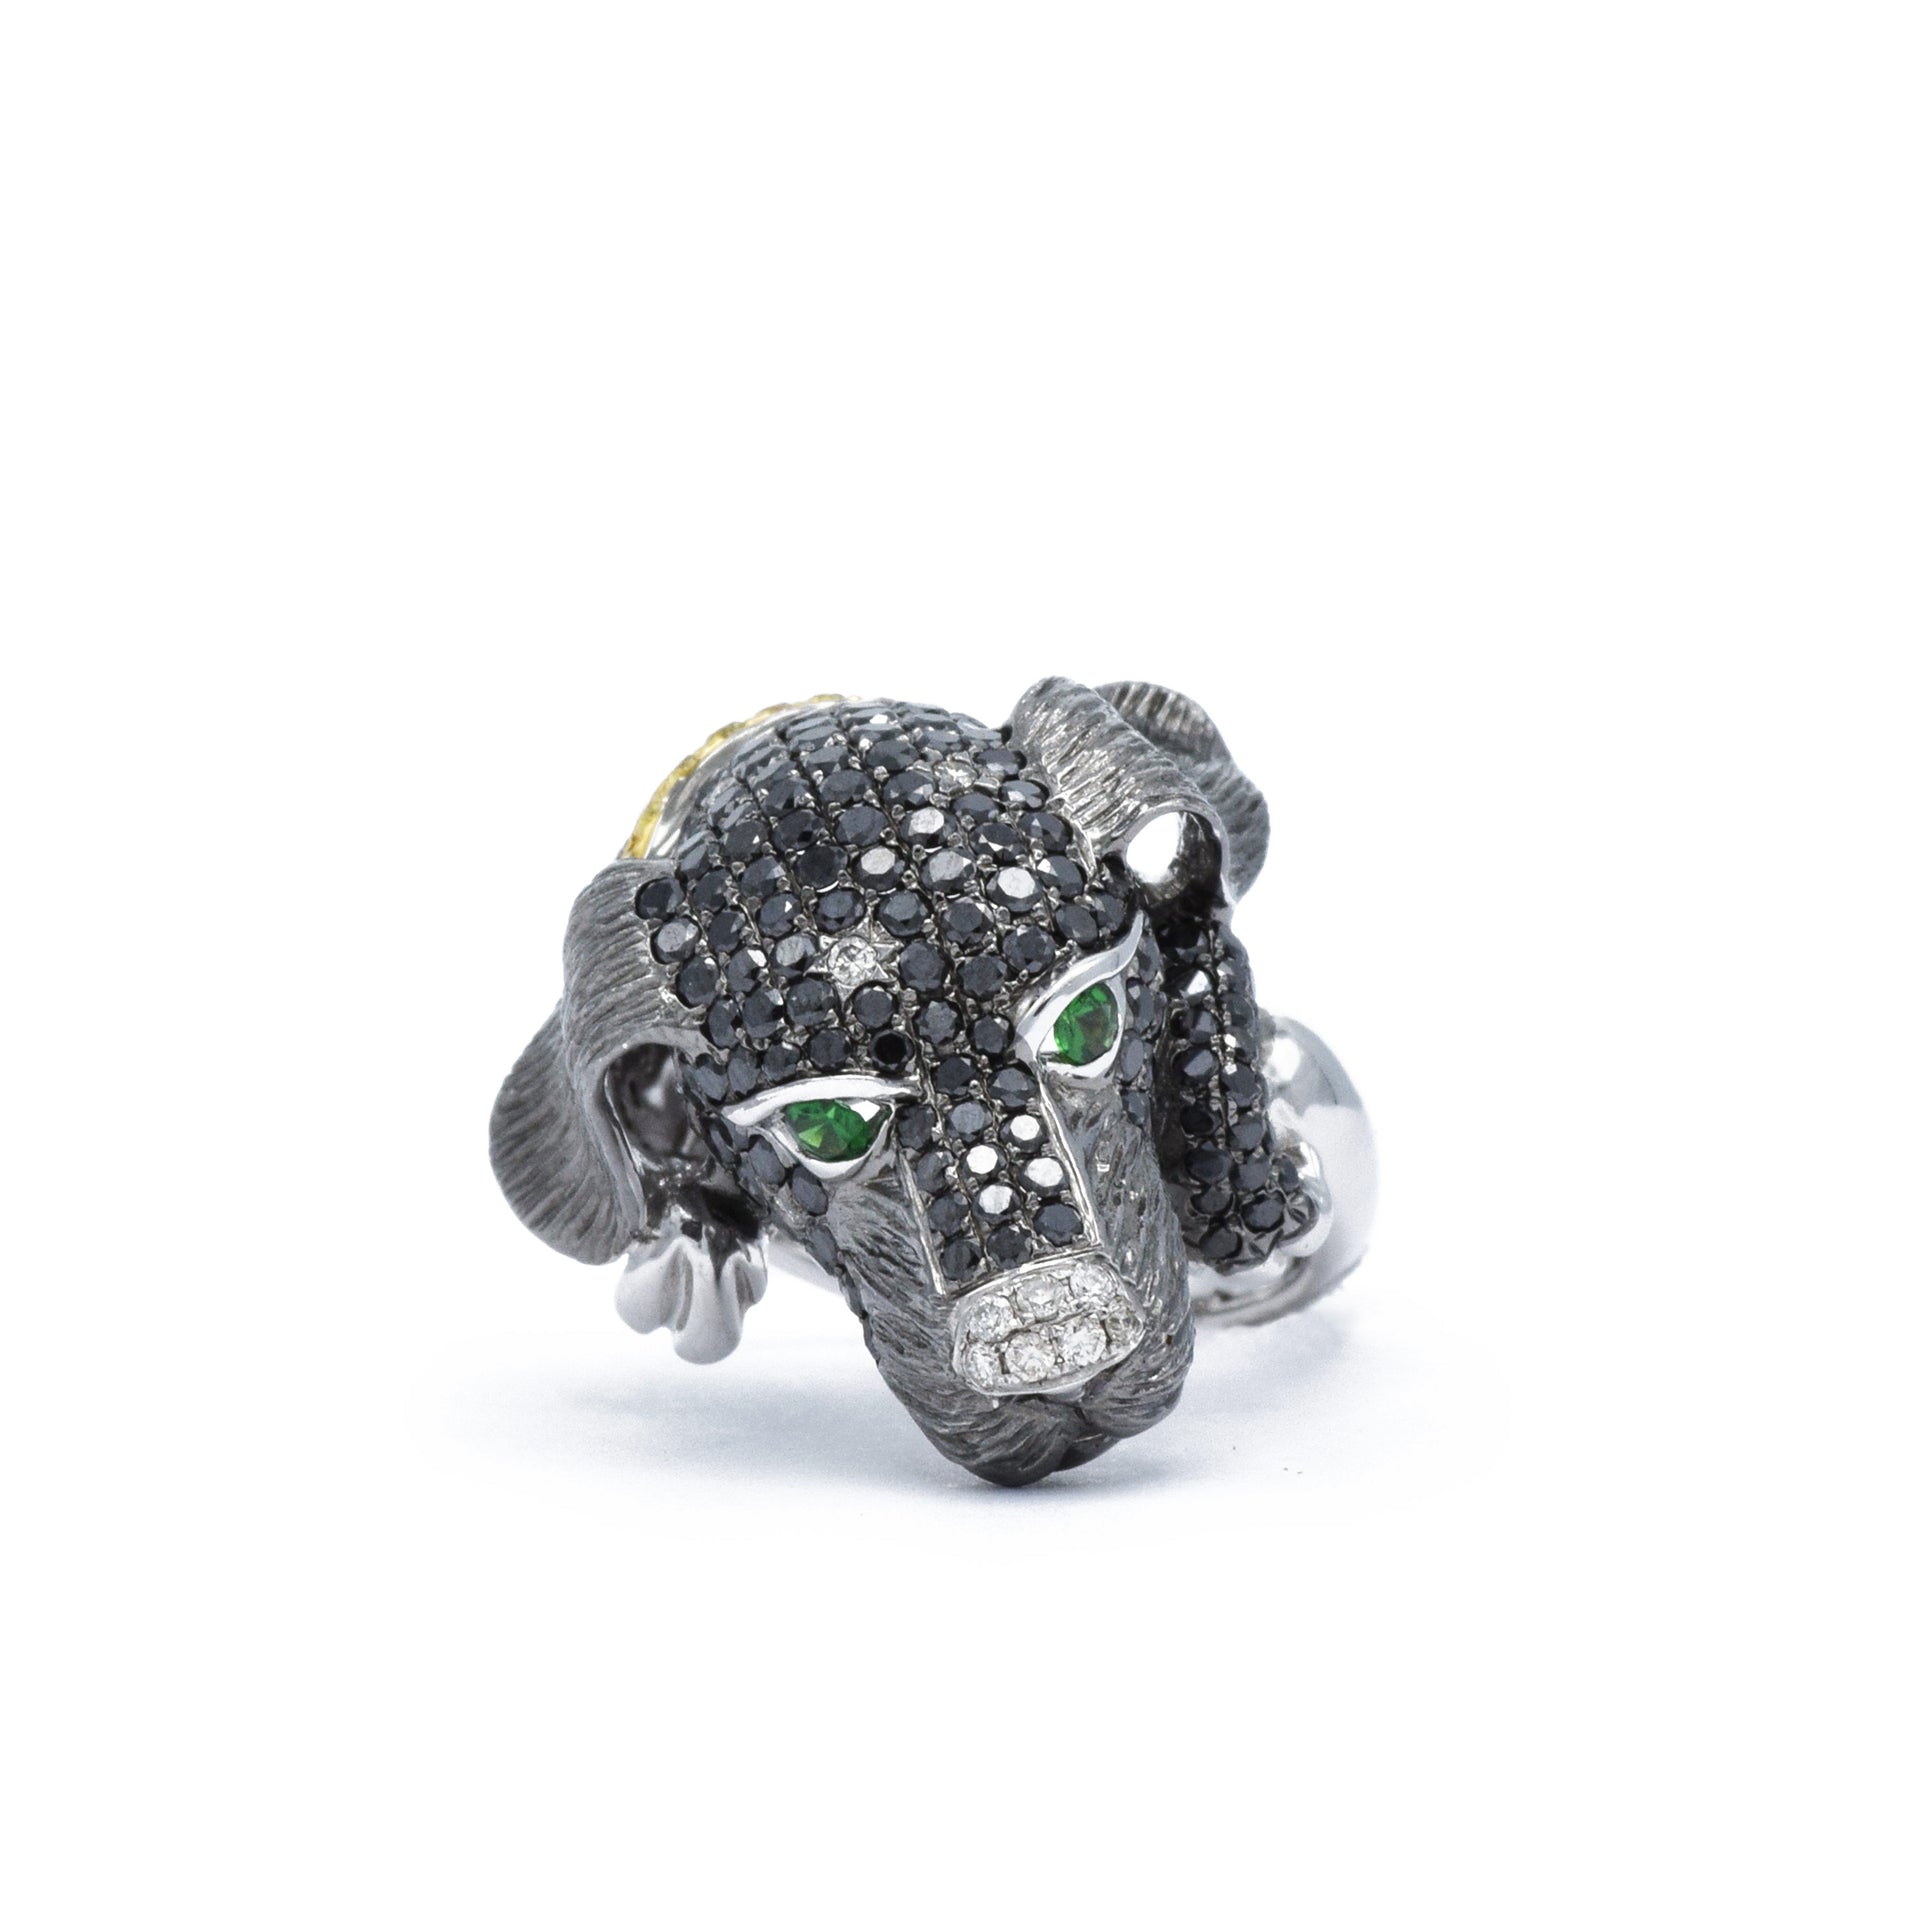 Puppy Ring with Black and White Diamonds